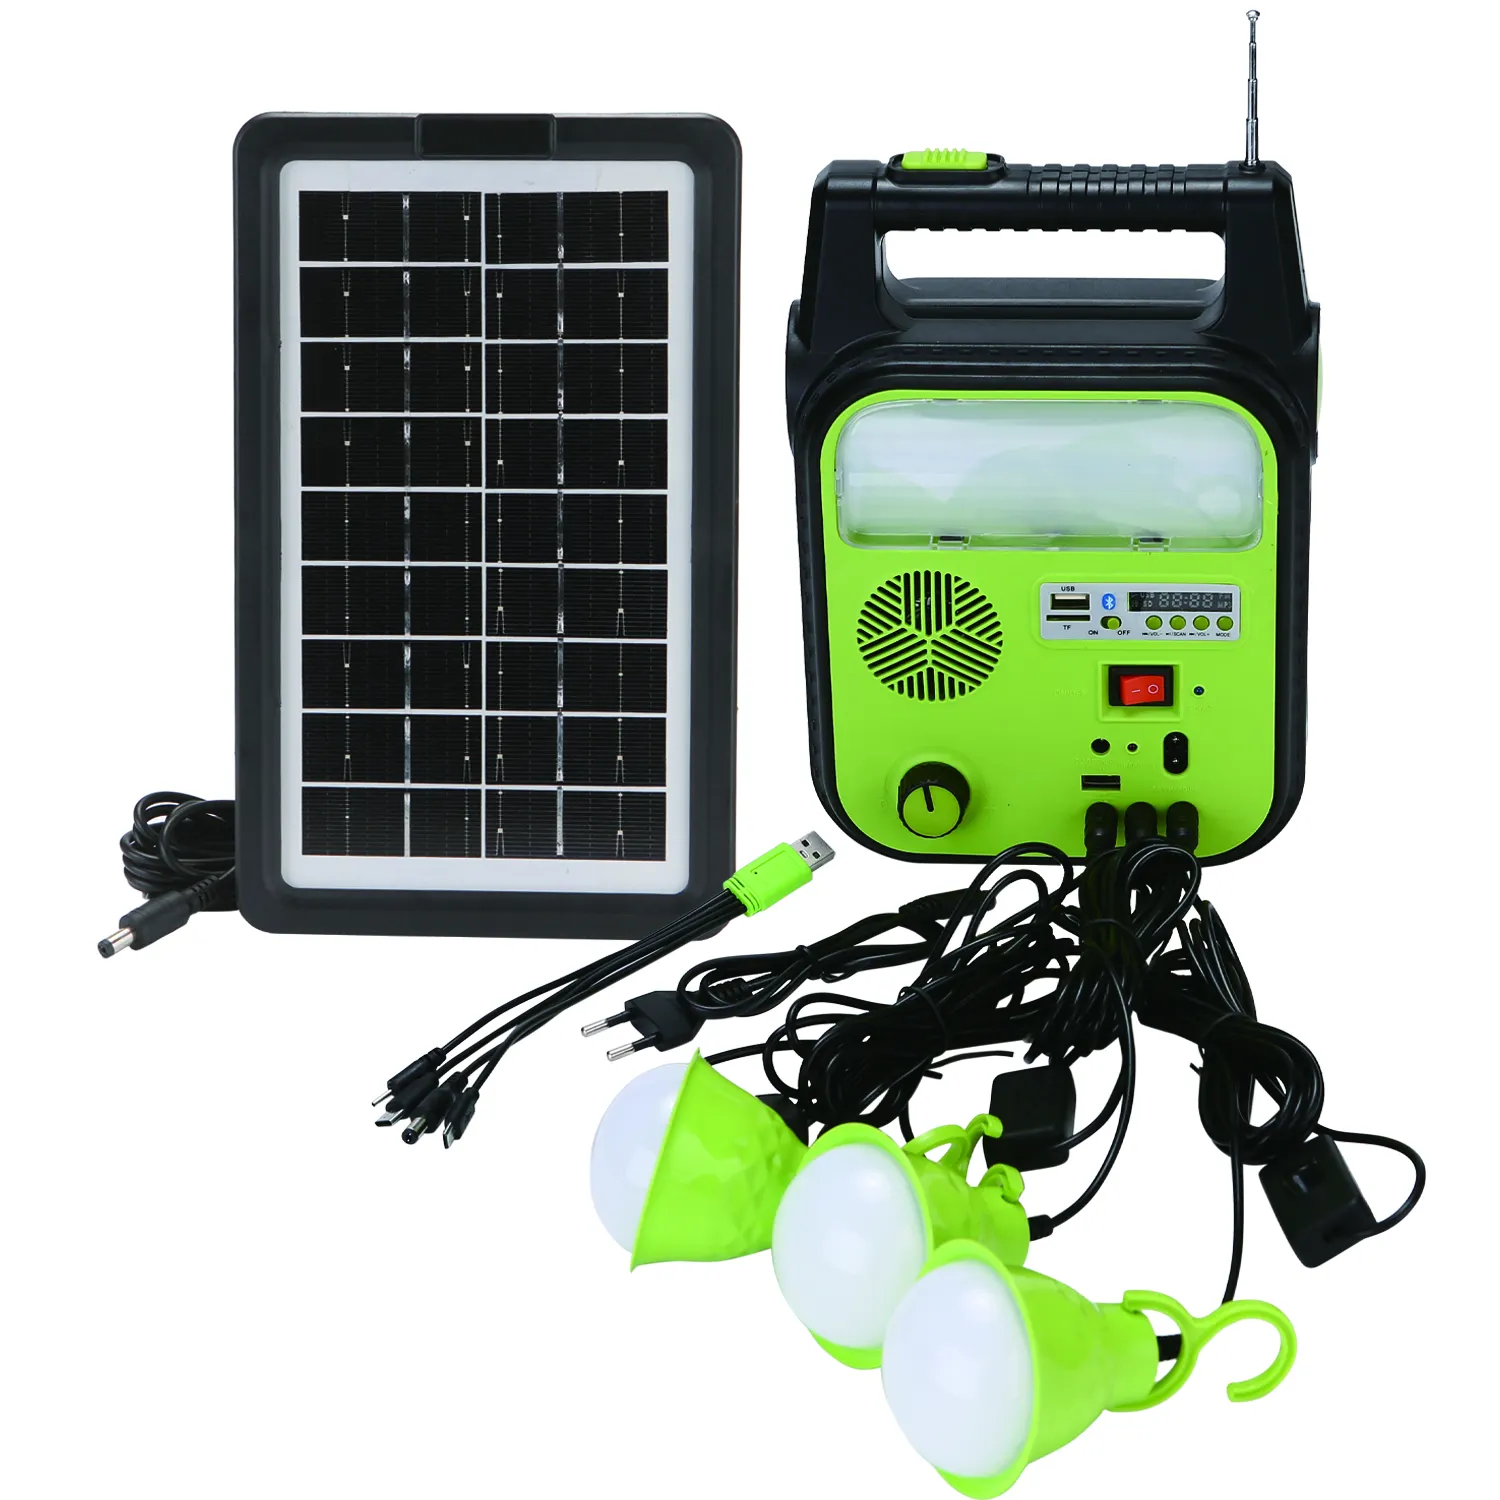 DT-9012B DAT portable led lighting with fm radio features support dimming solar lighting system for indoor